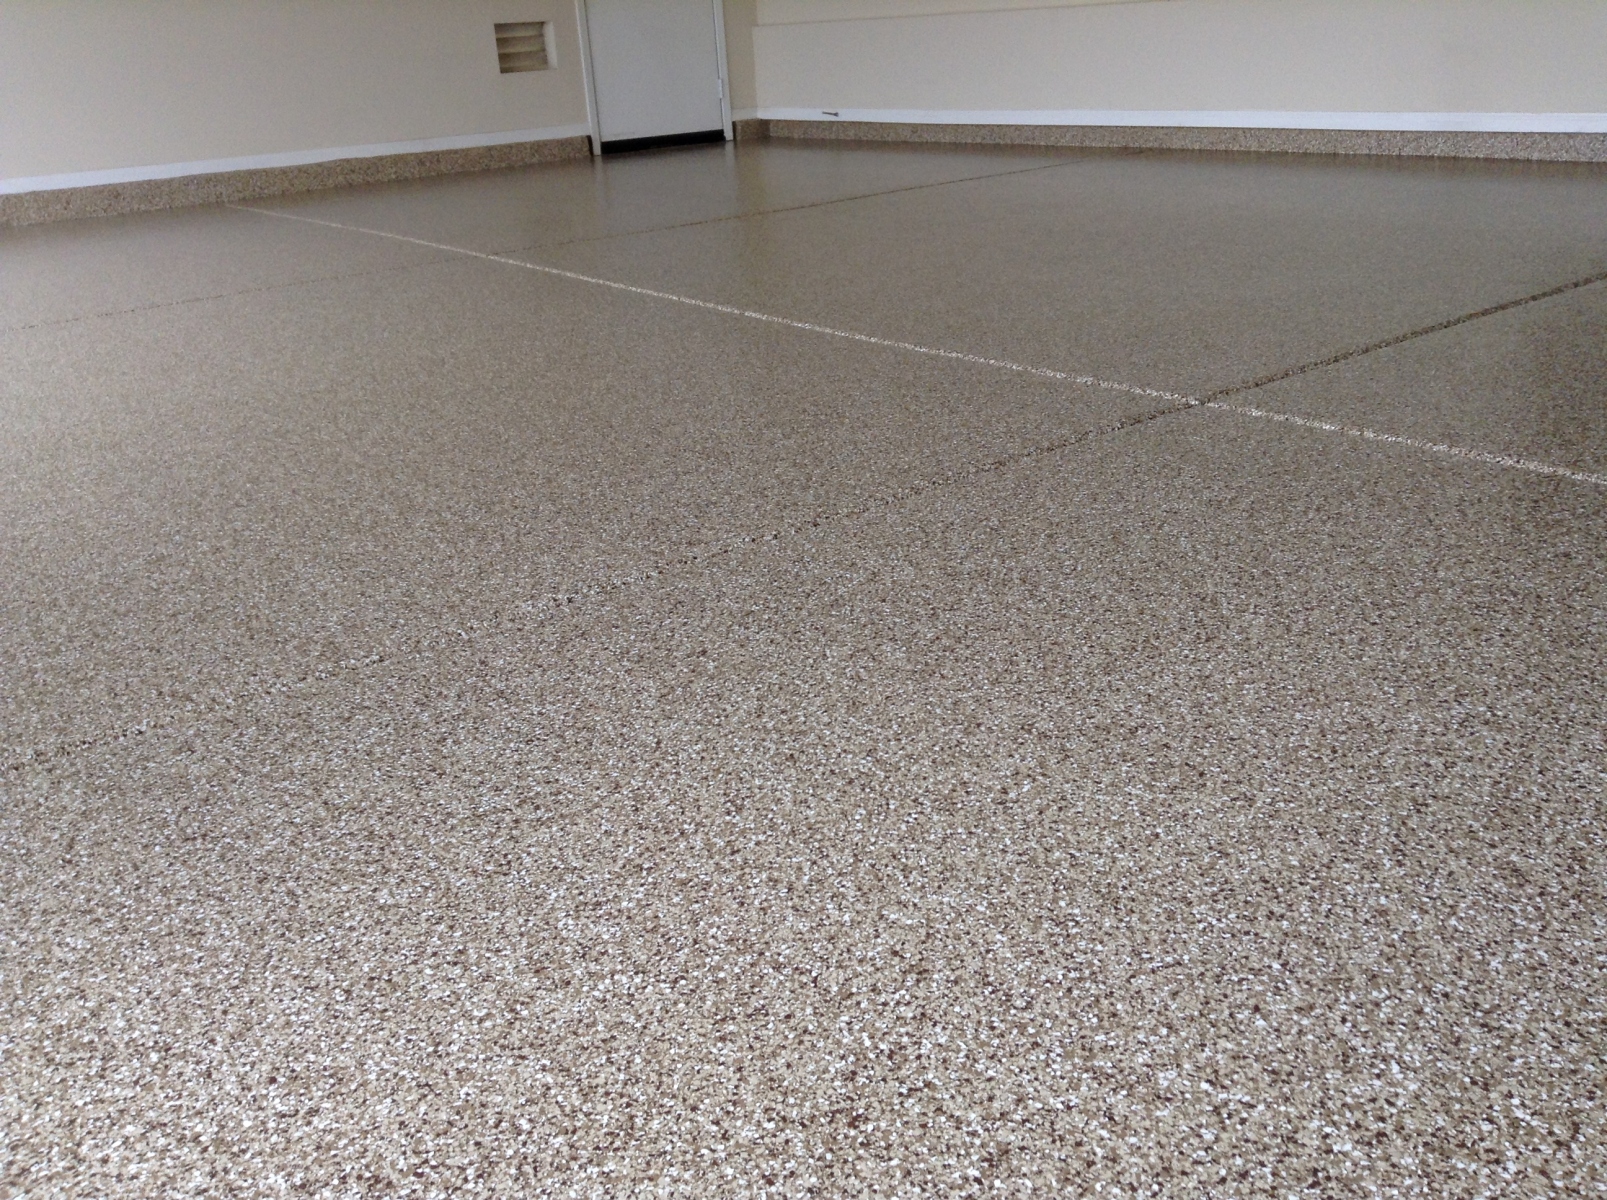 Recent Epoxy Flooring Project in Rancho Cucamonga Garage